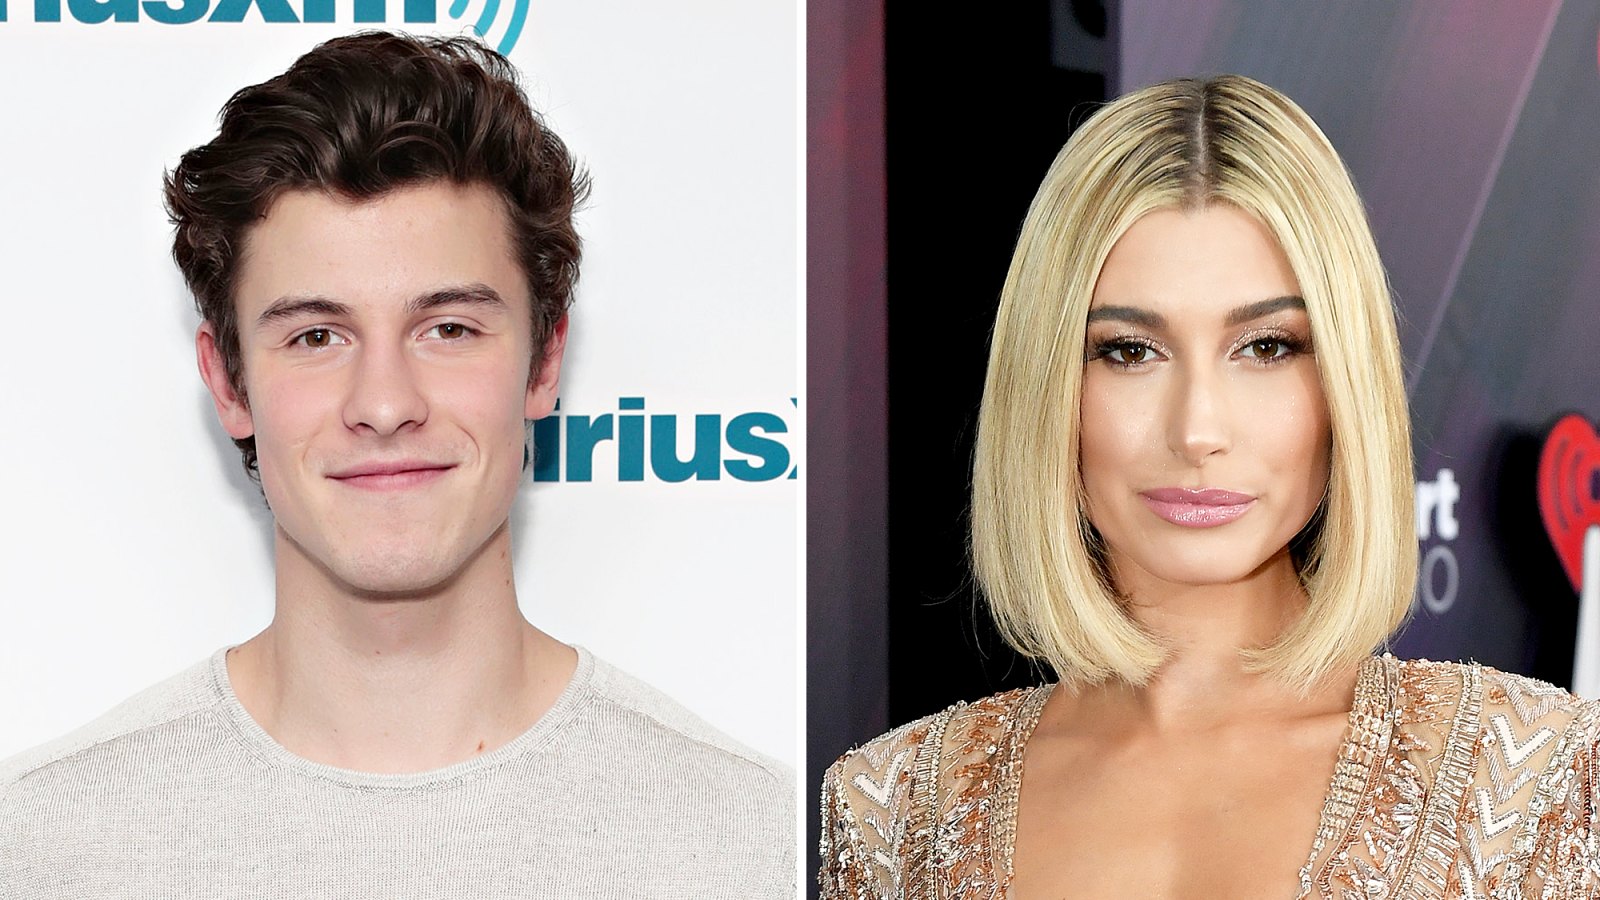 Shawn Mendes Shares Sultry Photo With Hailey Baldwin